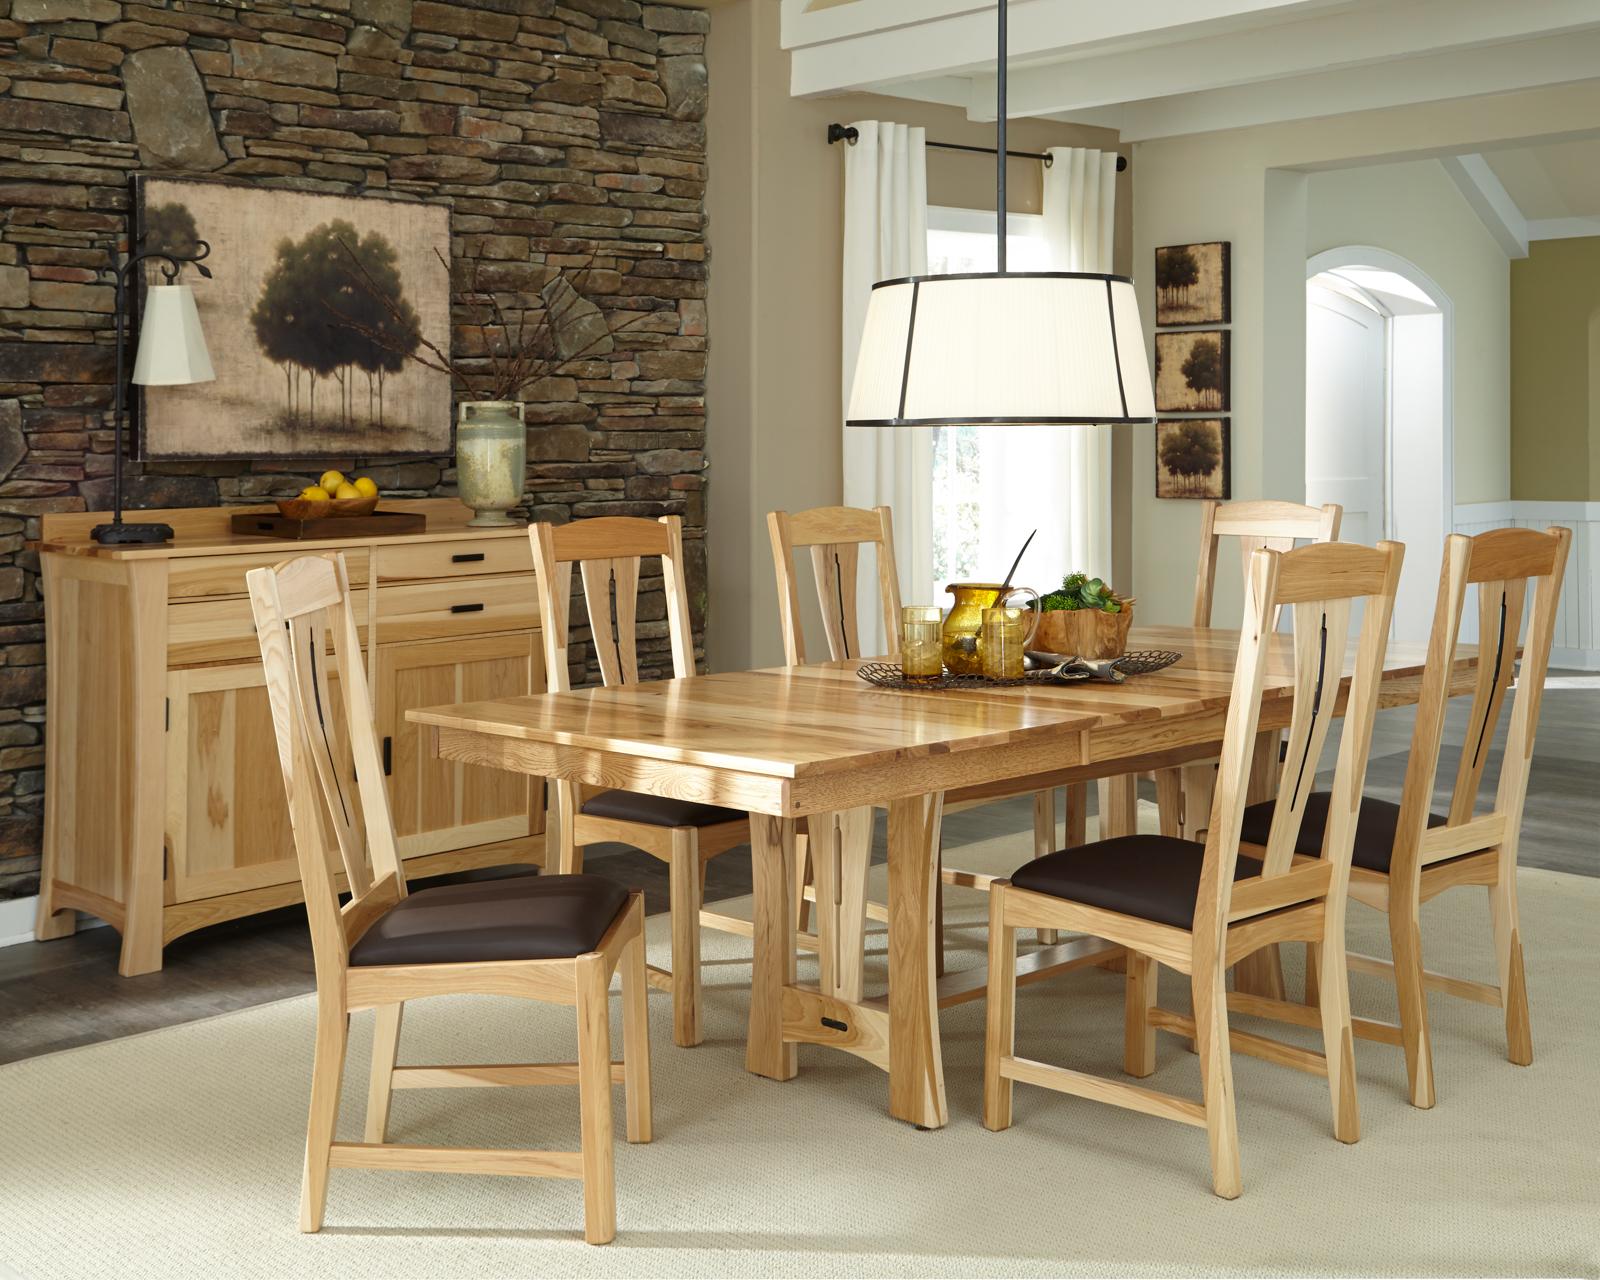 Rustic Dining Table Set Cattail Bungalow Natural CATNT6300-Set-7 in Natural Top grain leather